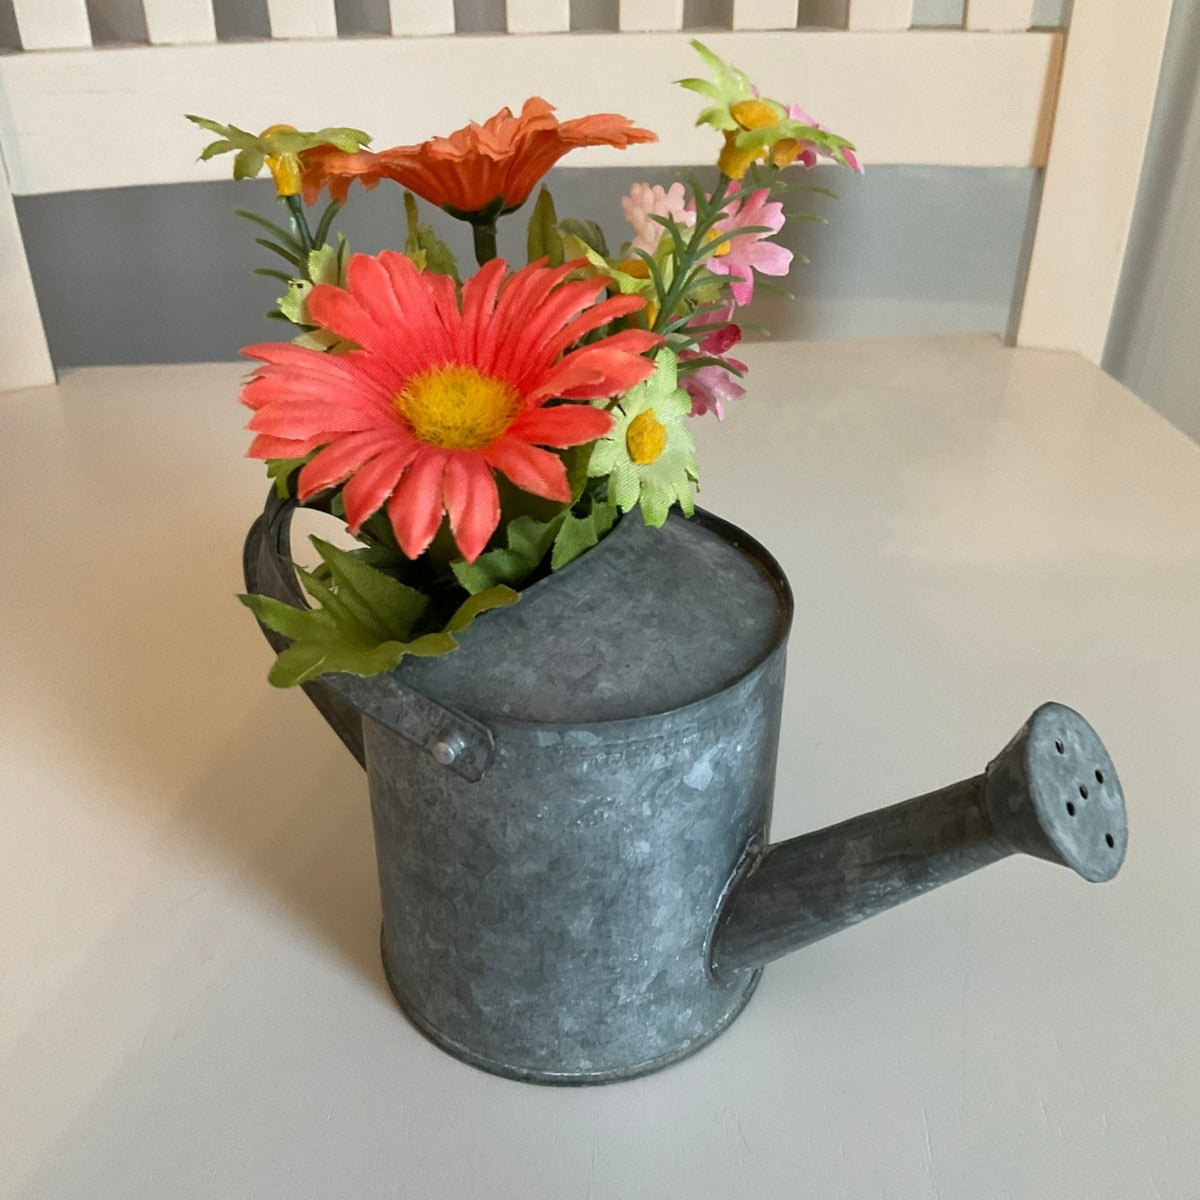 Mini Galvanized Watering Can is so Cute!